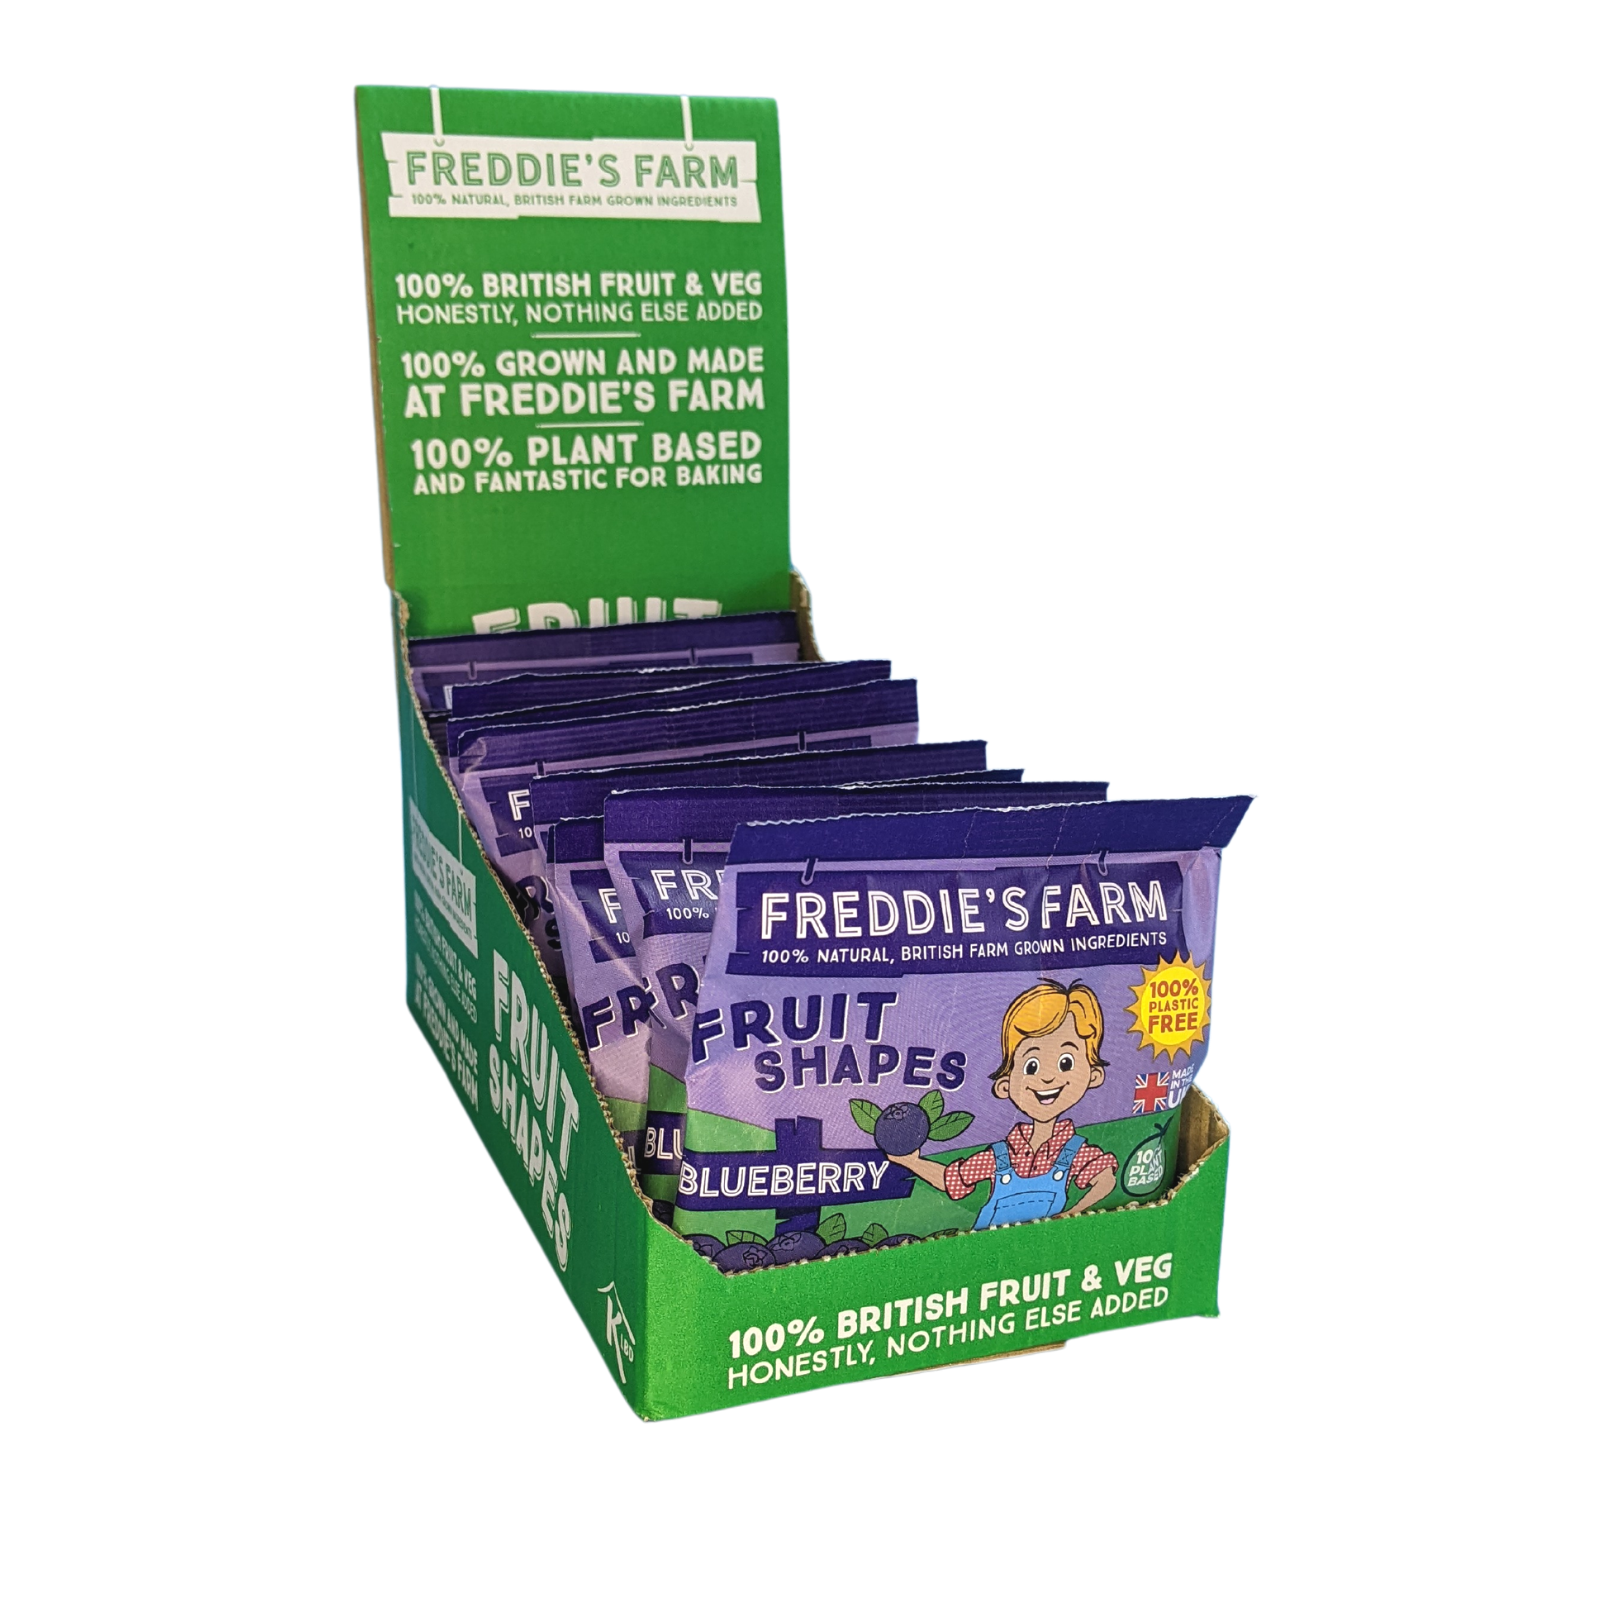 Freddie's Farm Fruit Shapes - Blueberry - CDU (16 x 20g packets plastic free packets) - NEW